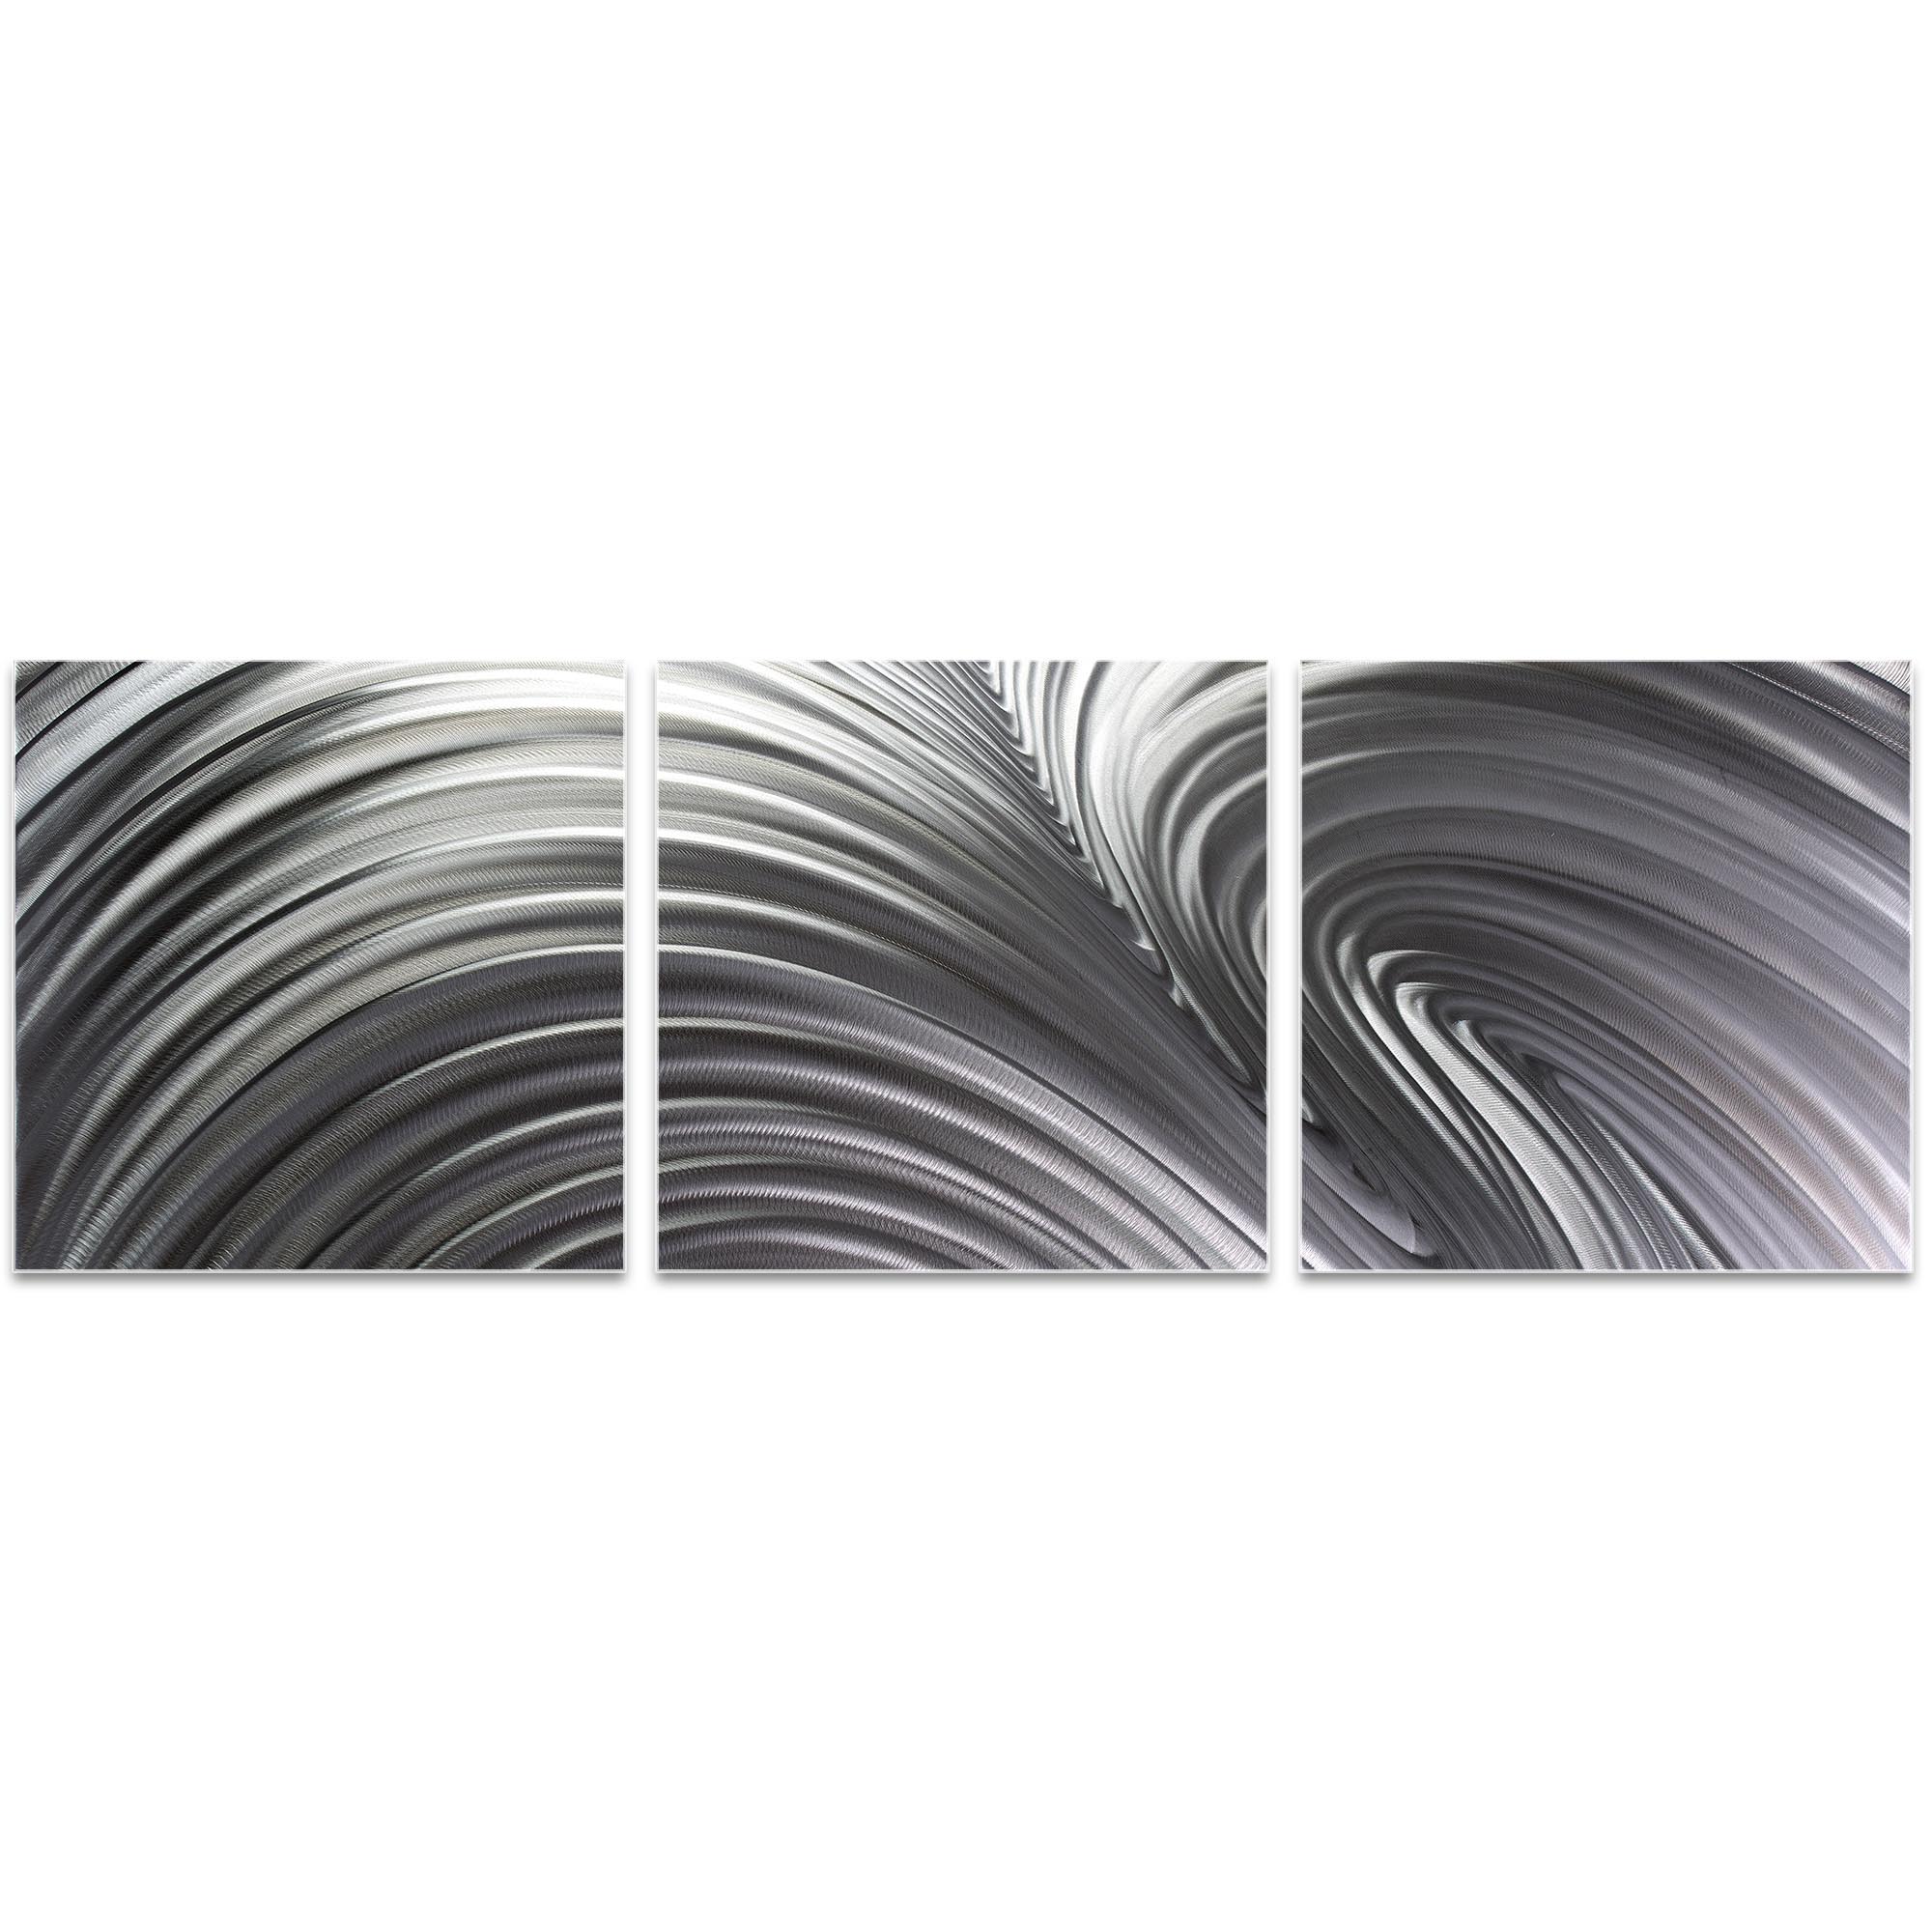 Fusion Triptych 38x12in. Metal or Acrylic Contemporary Decor - Image 2